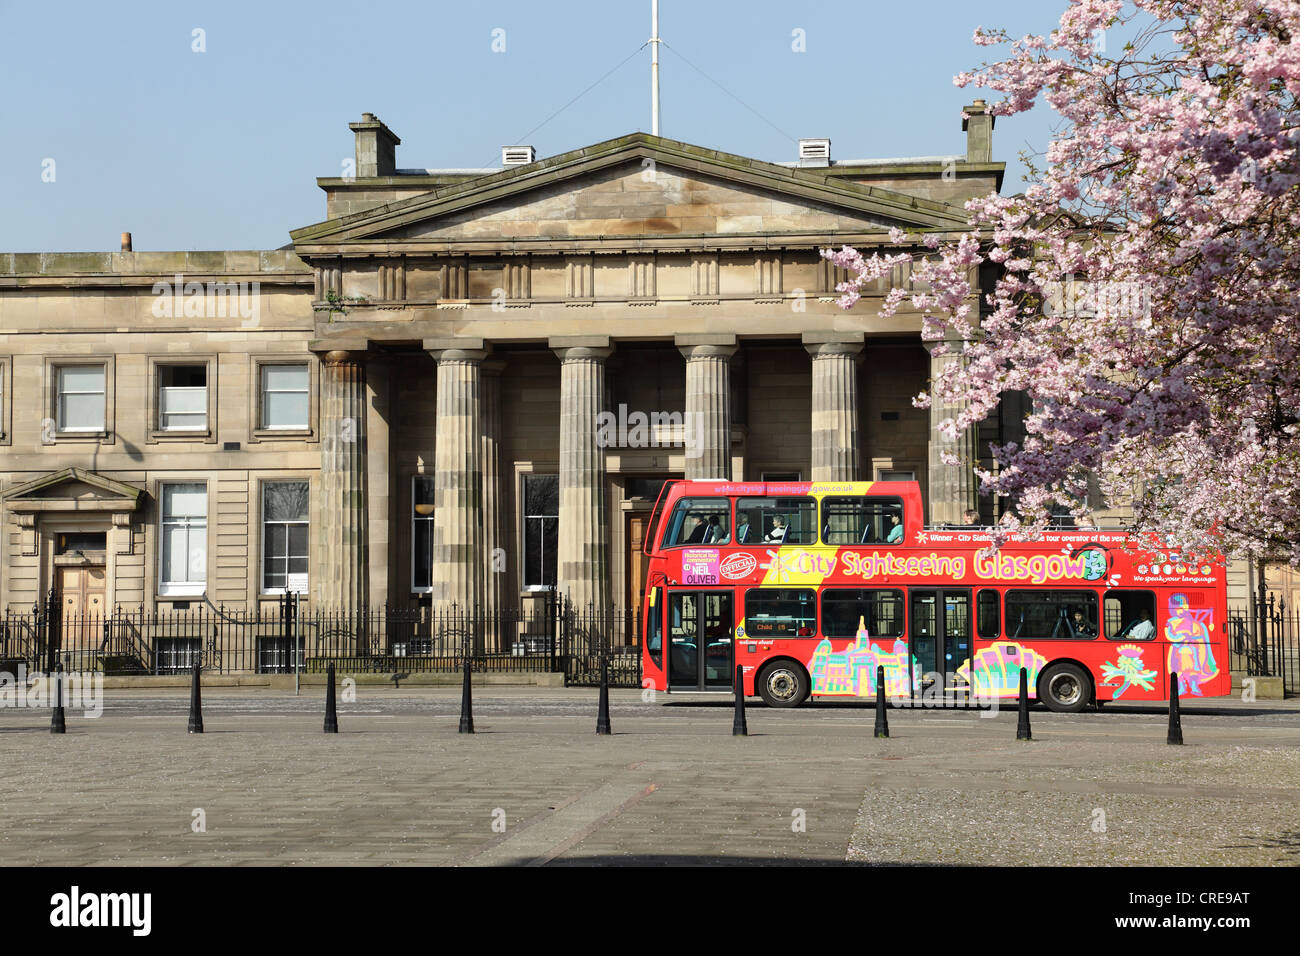 Glasgow City Sightseeing tour bus passing the Old High Court building on Saltmarket in Spring, Scotland, UK Stock Photo